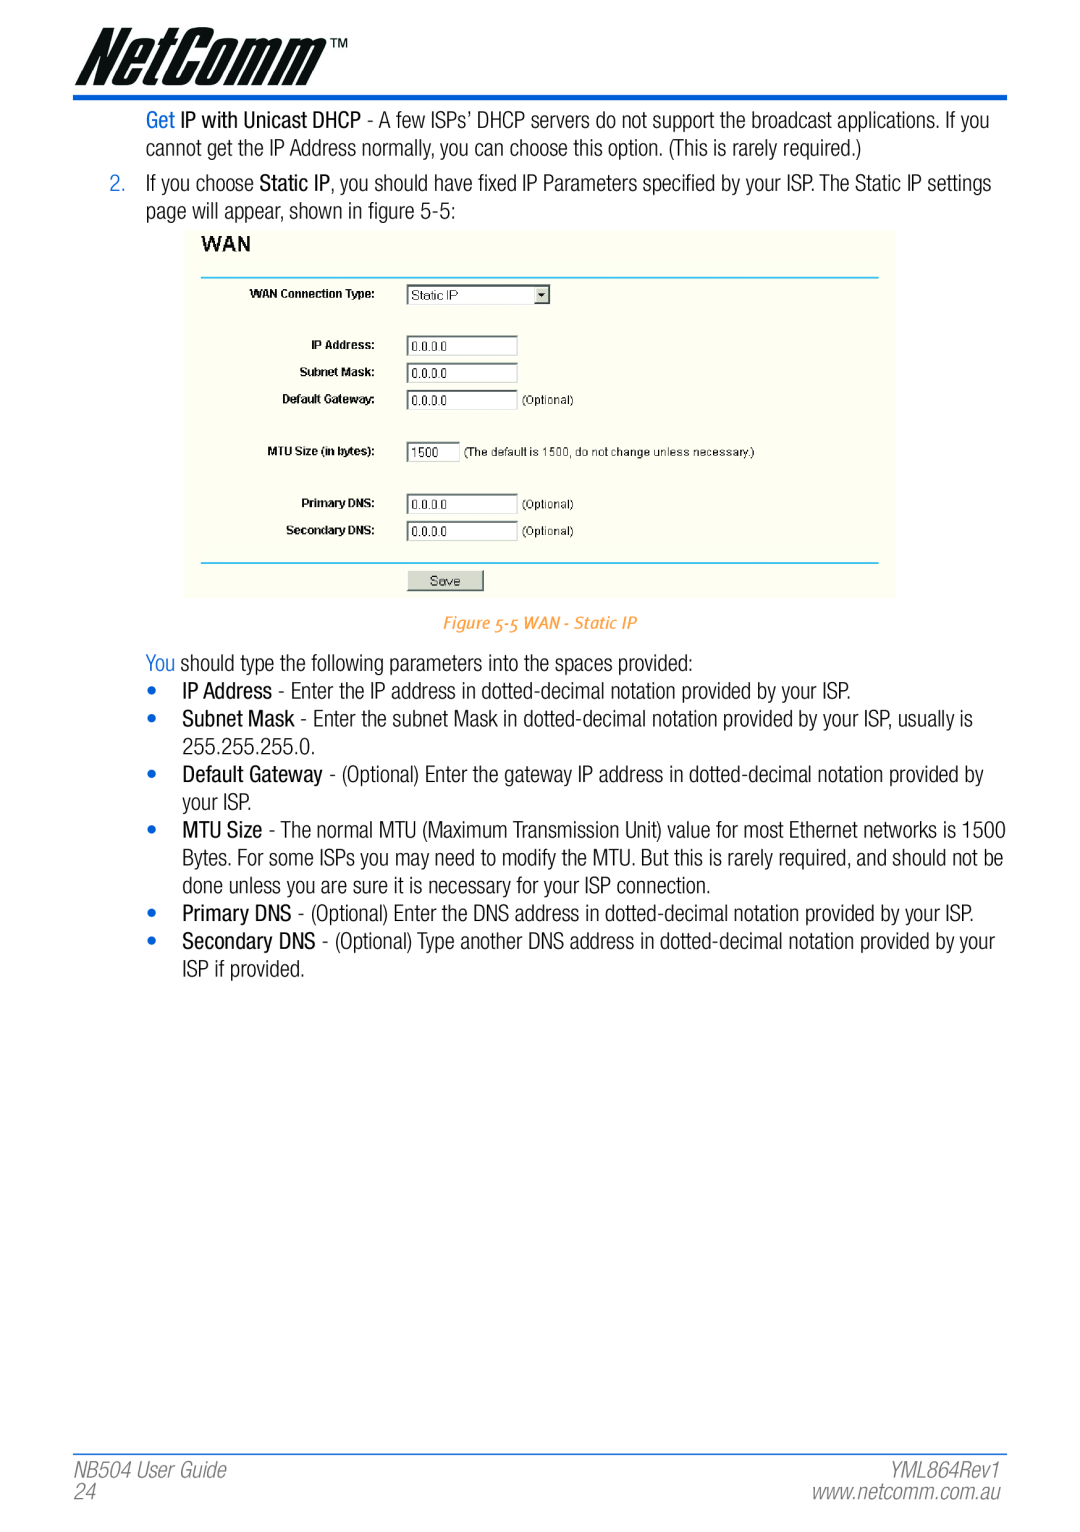 NetComm manual You should type the following parameters into the spaces provided, NB504 User Guide 